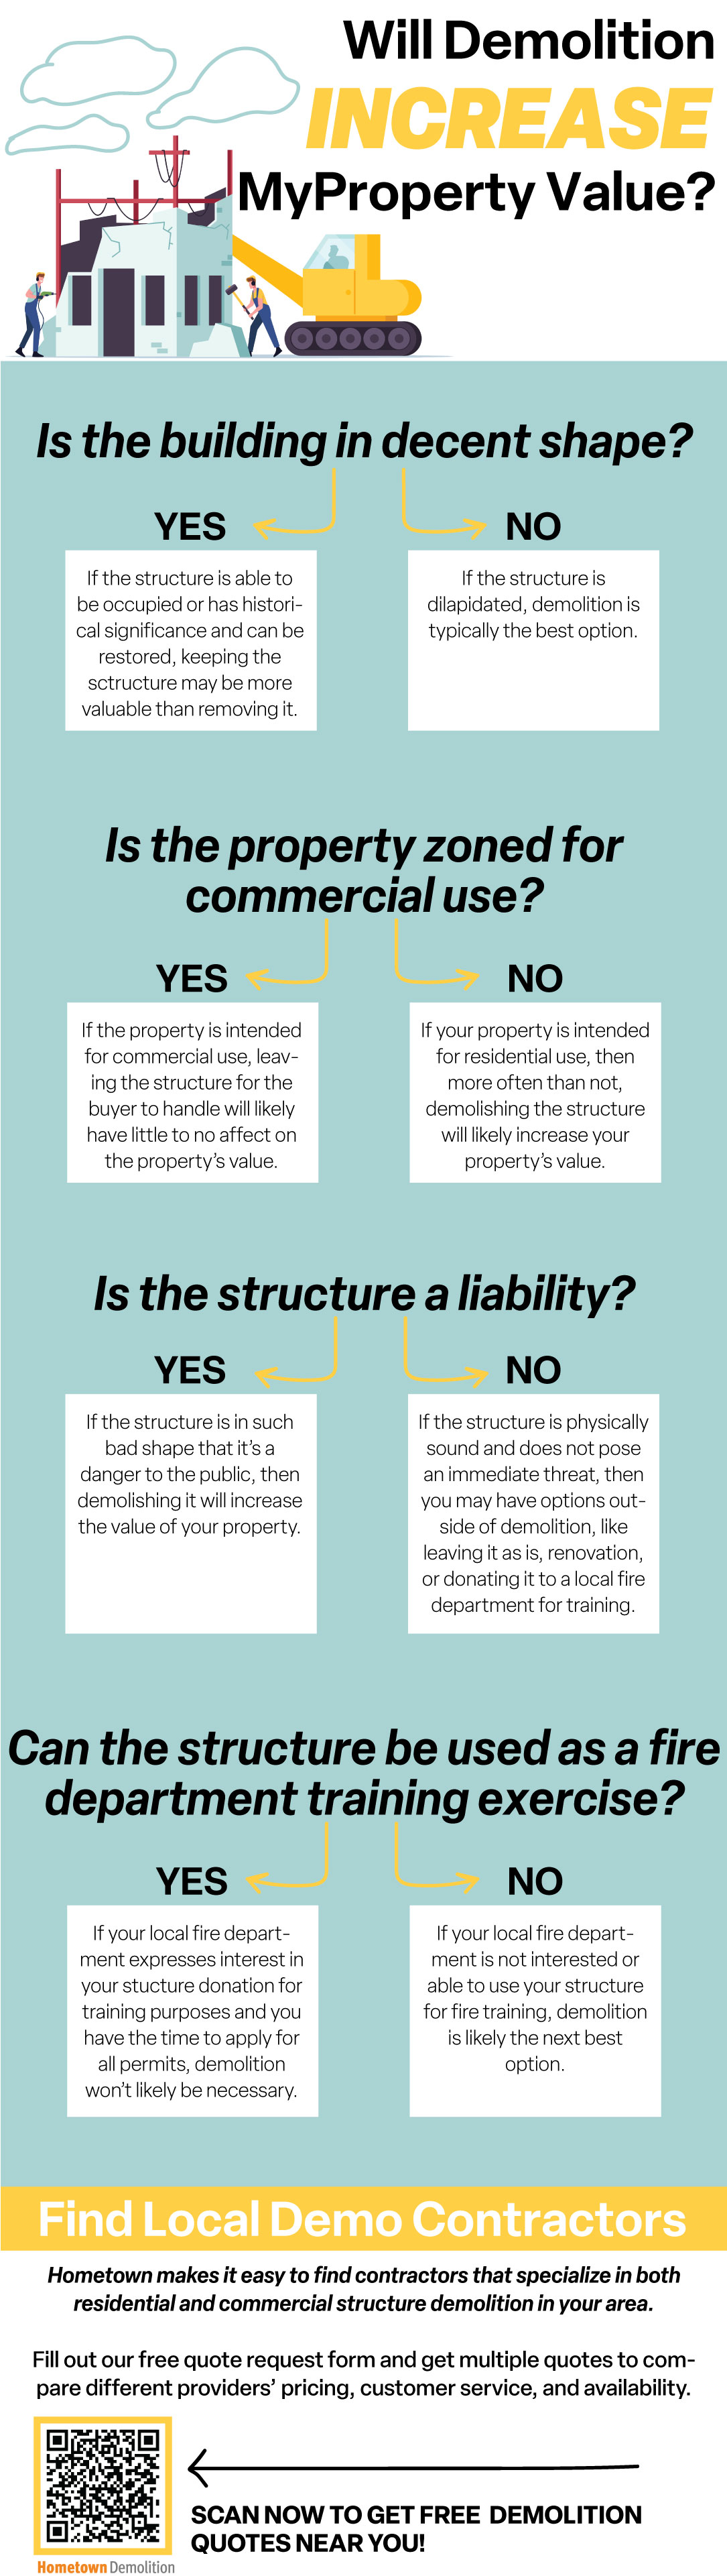 Will Demolition Increase My Property Value? infographic